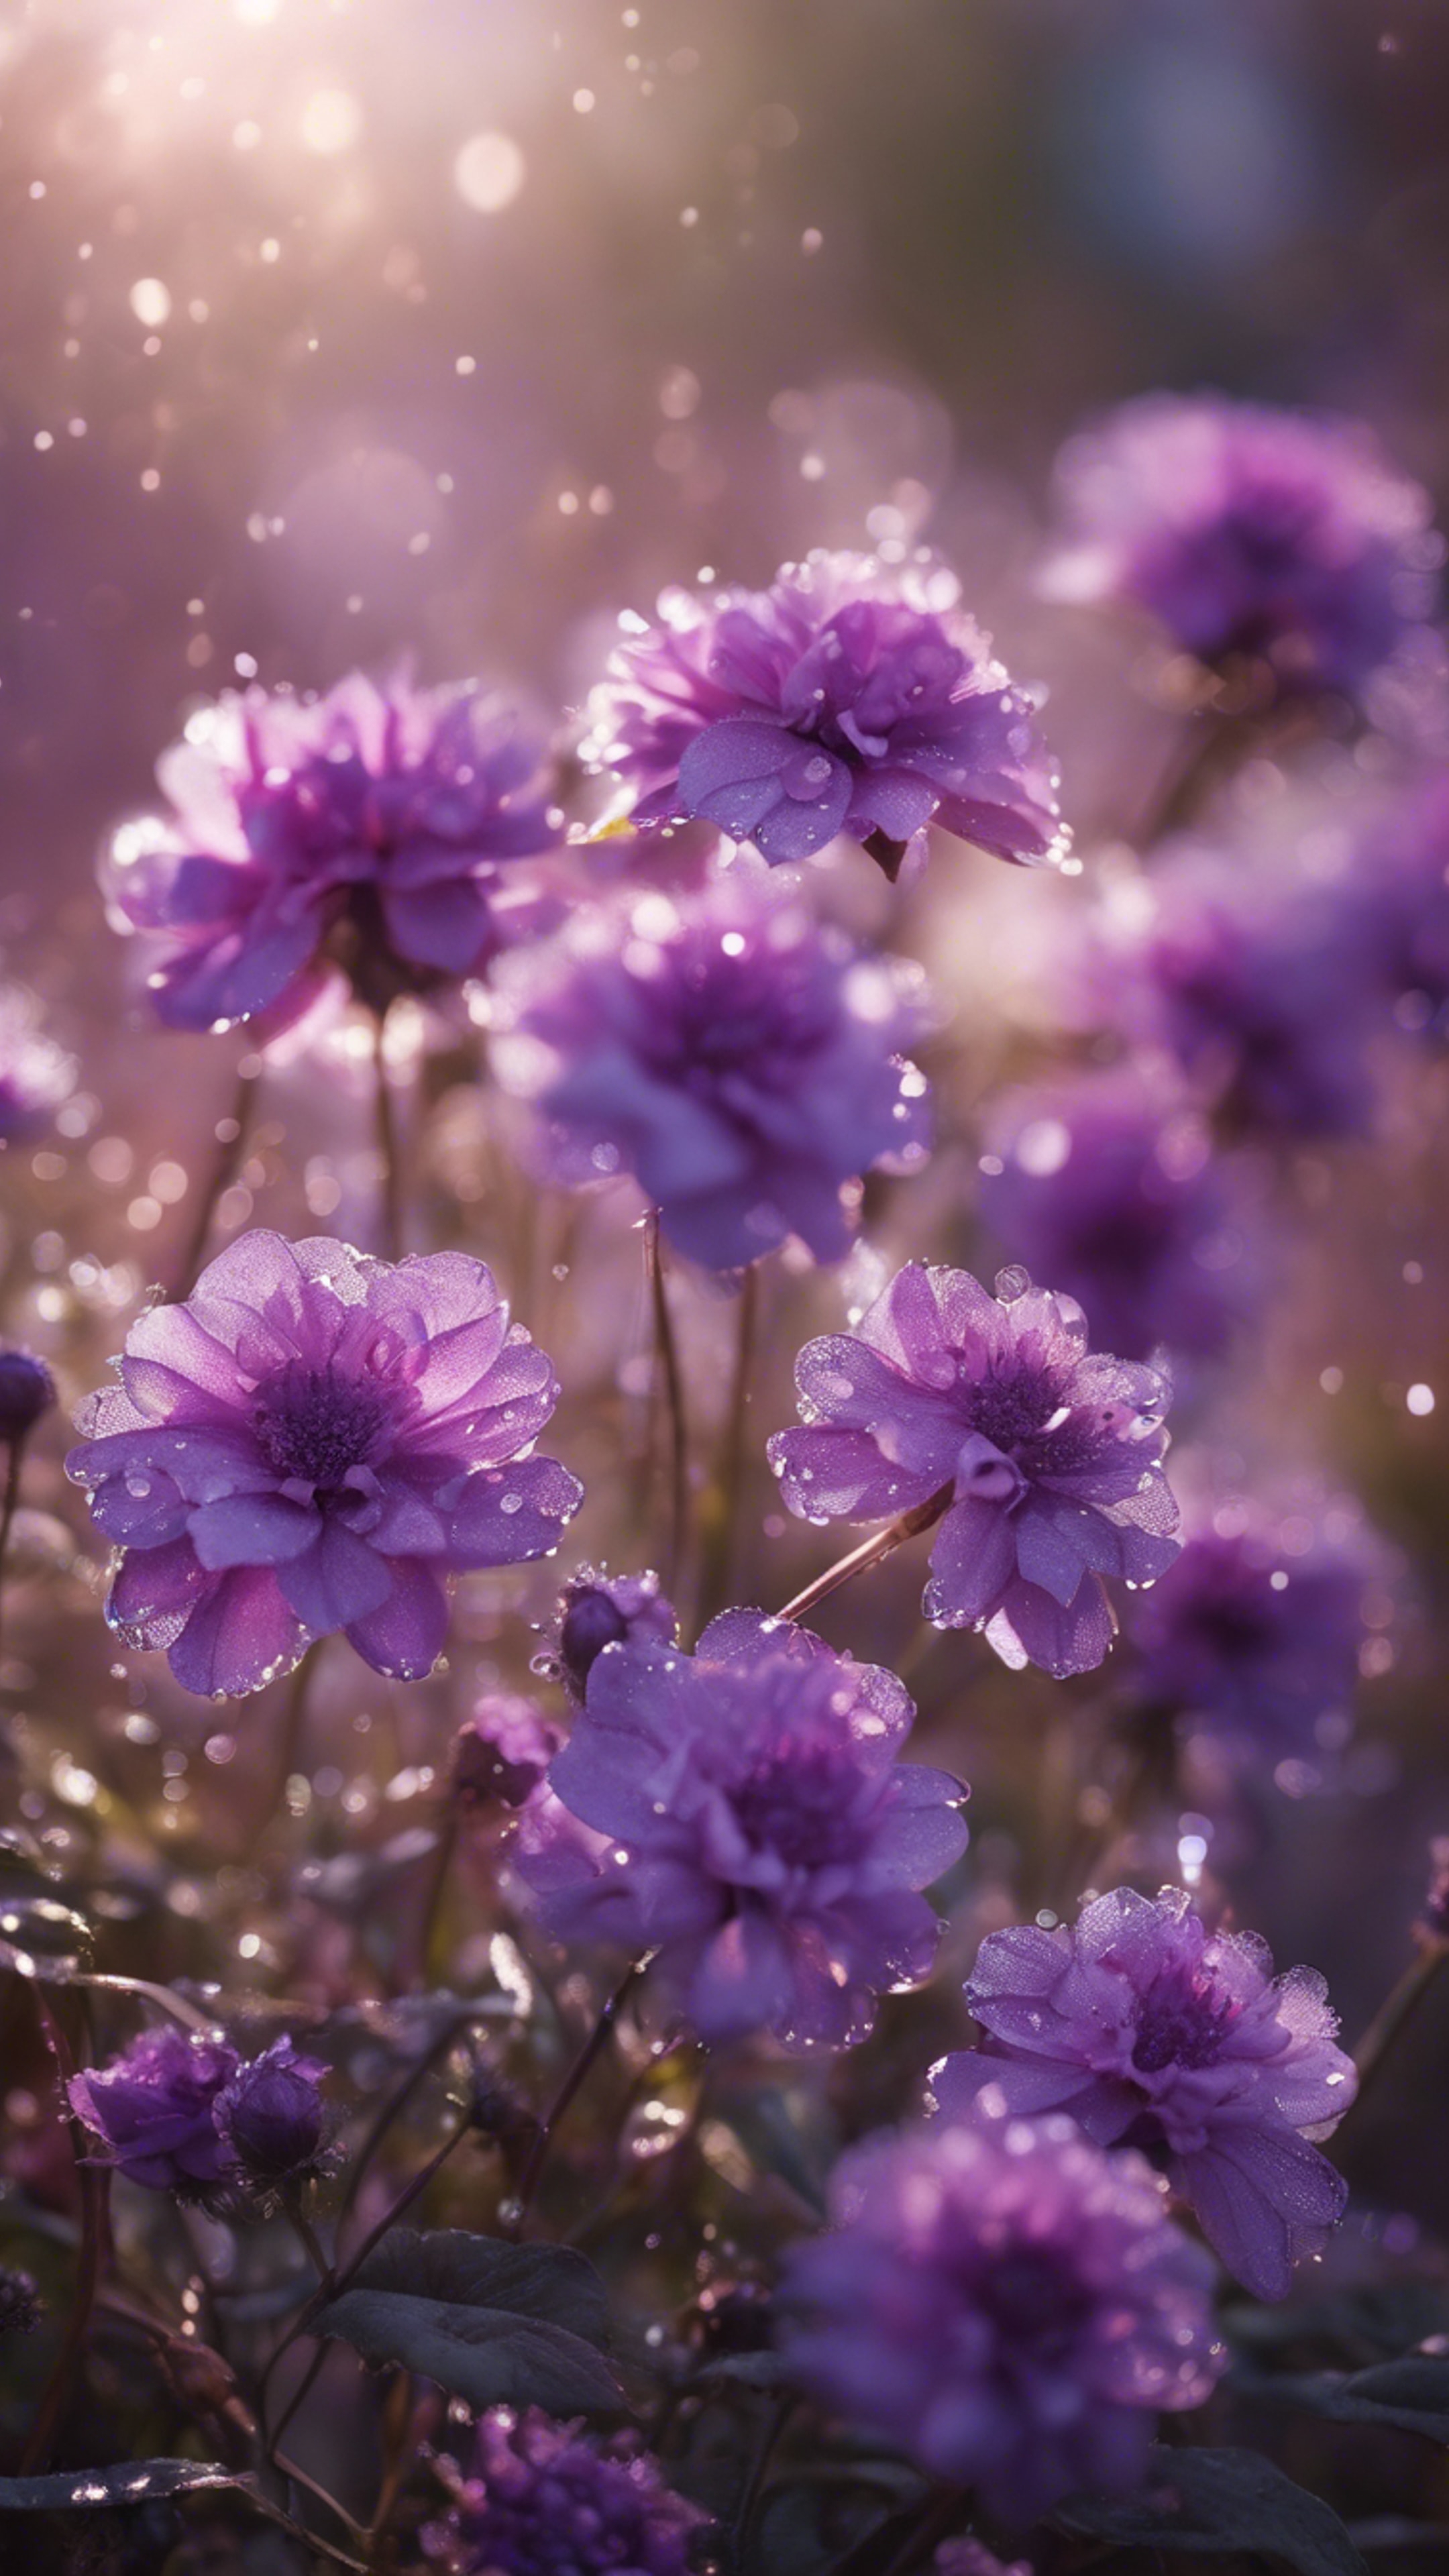 An impressive collage of purple flowers in full bloom, highlighted by sparkling morning dew. Hintergrund[23d1df20d4e341739cf3]